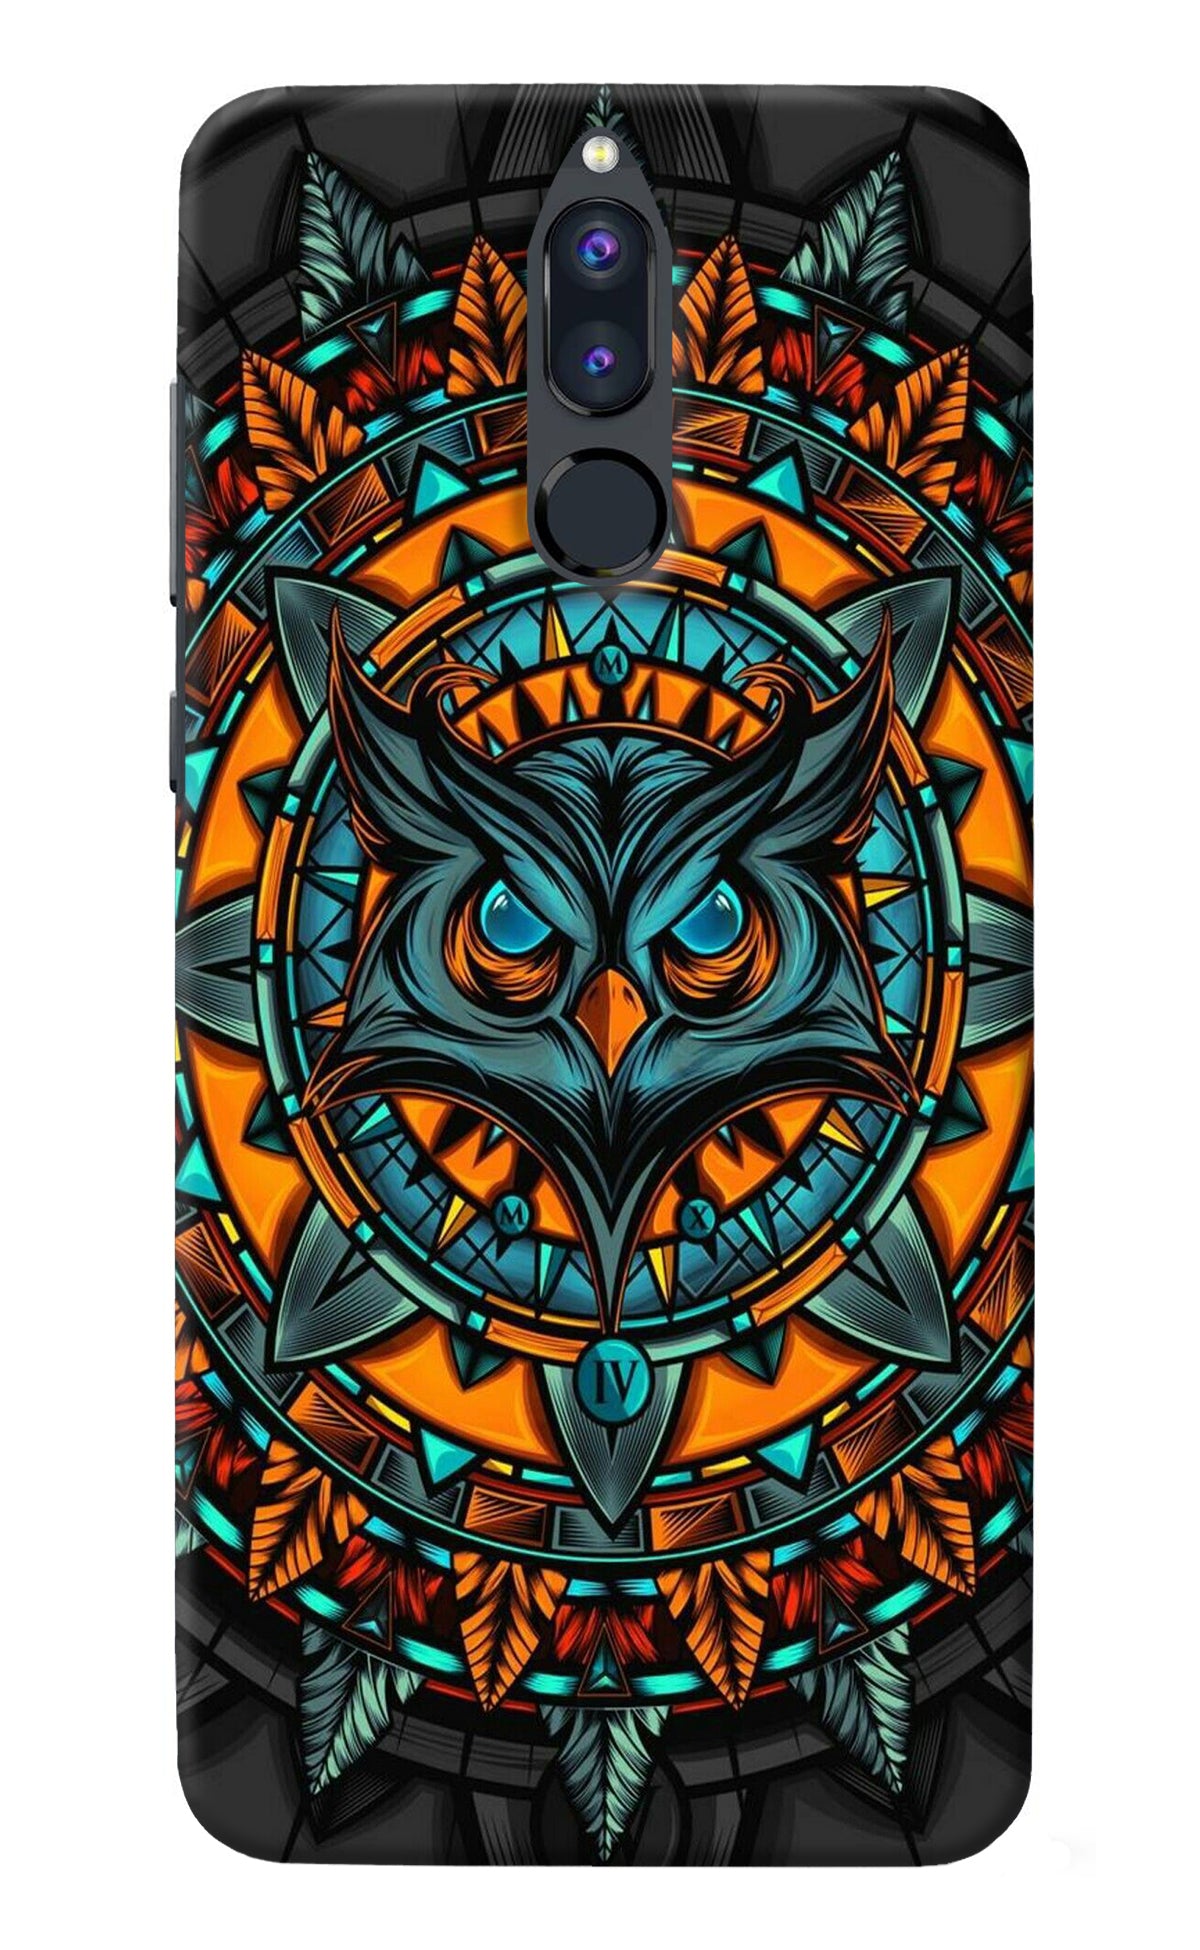 Angry Owl Art Honor 9i Back Cover